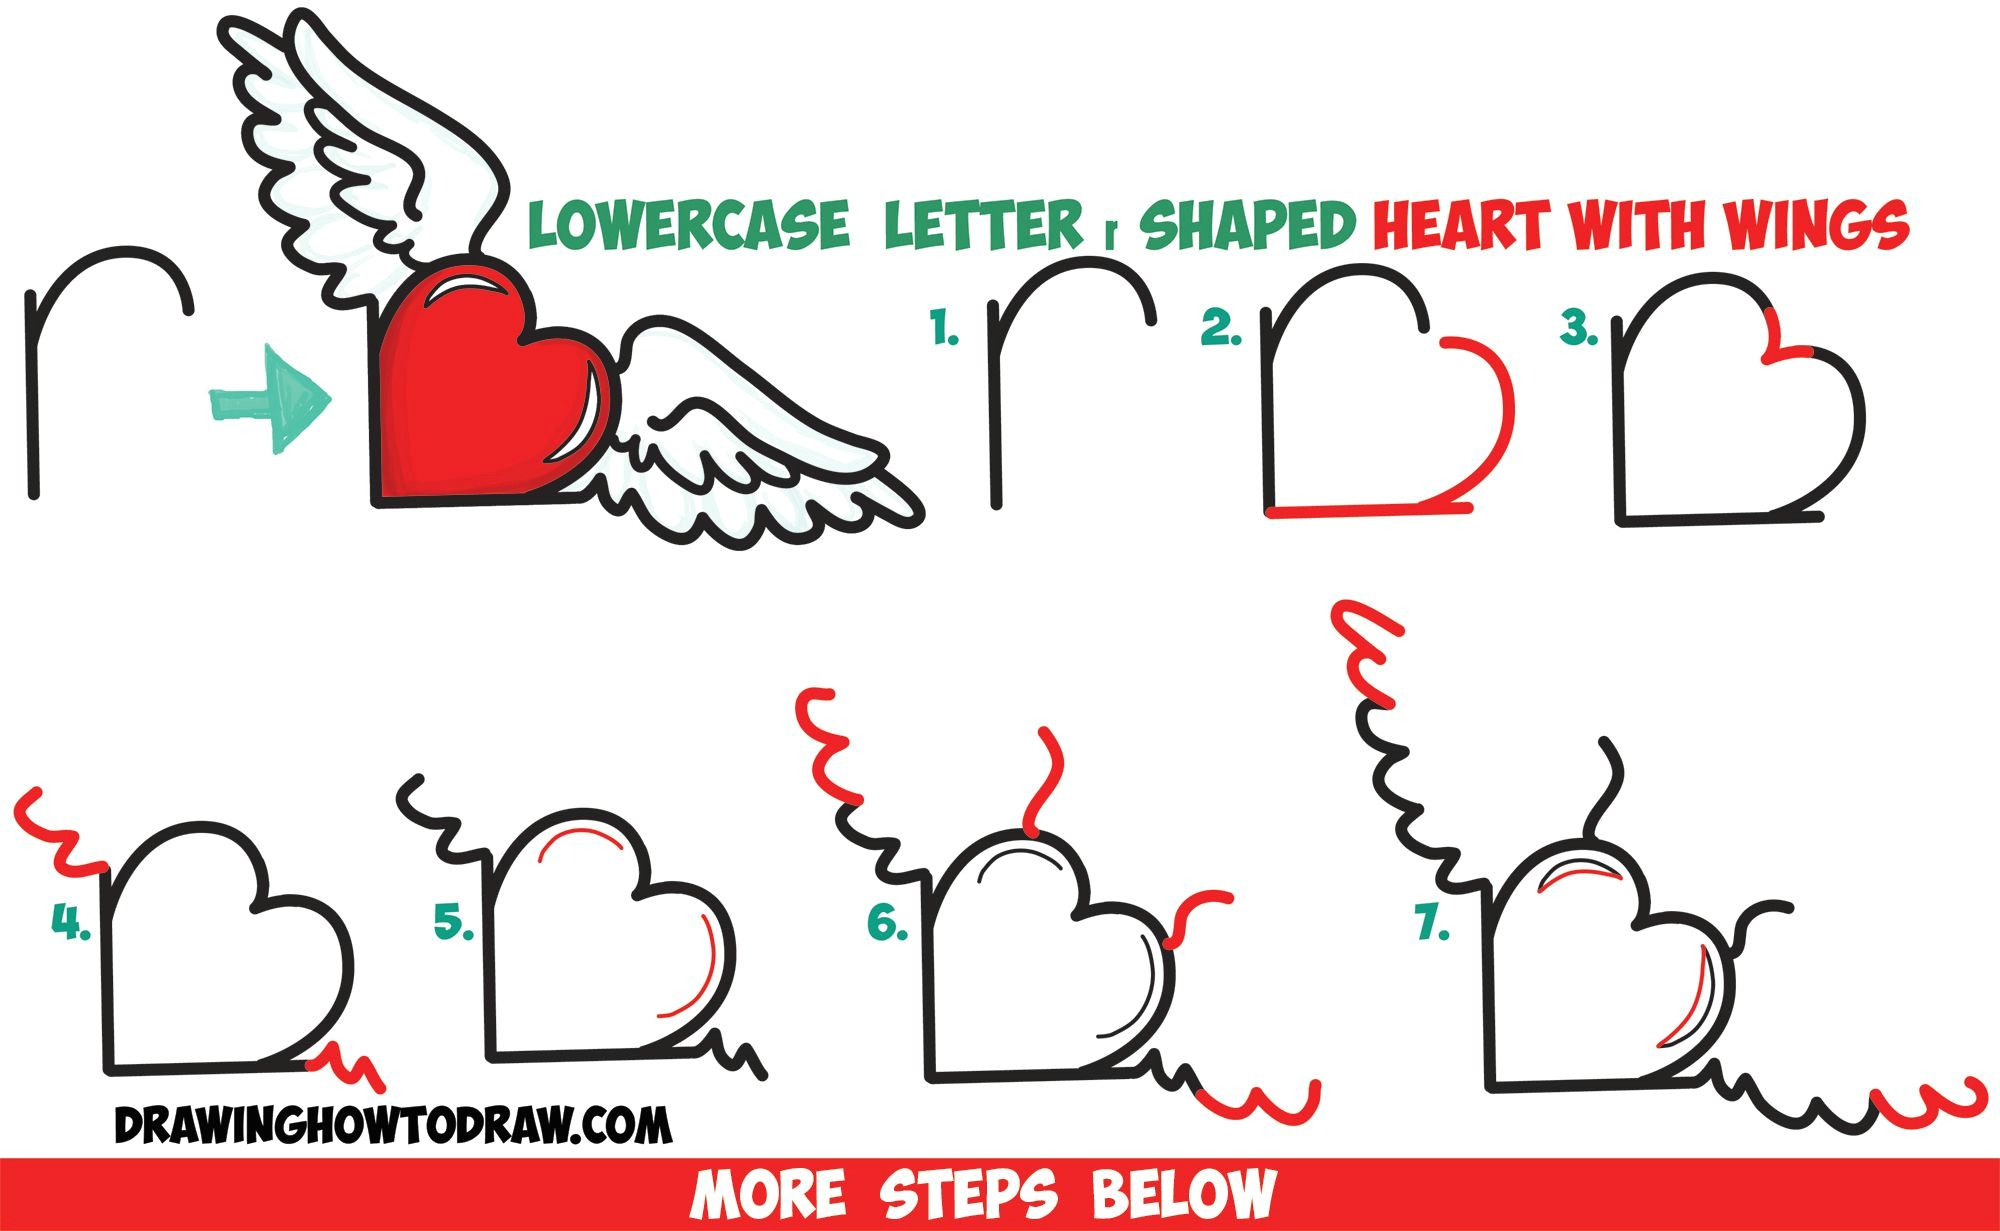 Easy Drawings Using Shapes How to Draw Heart with Wings From Lowercase Letter R Shapes Easy